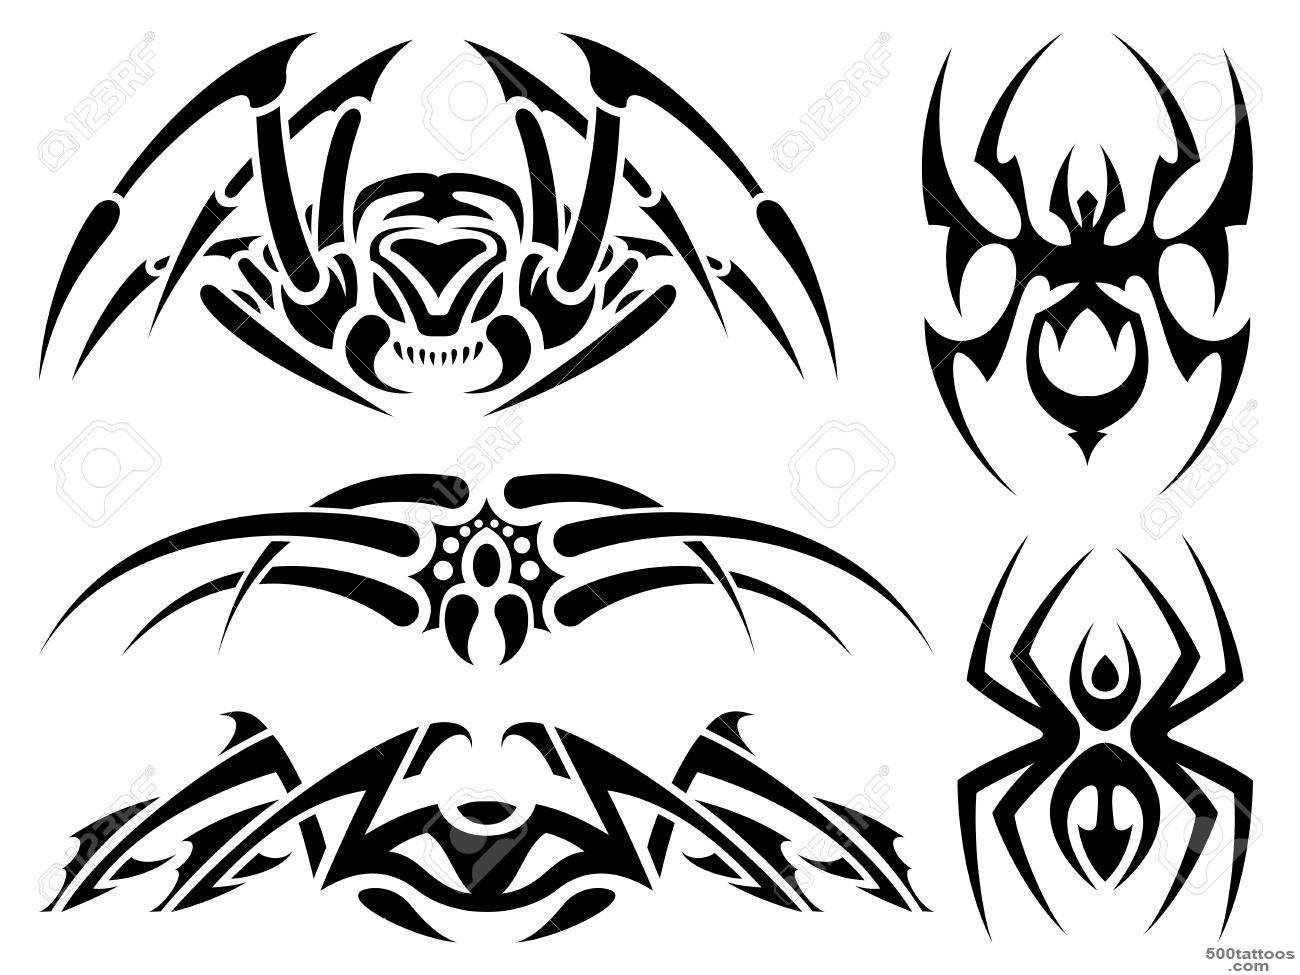 Spider Tattoo Images, Stock Pictures, Royalty Free Spider Tattoo ..._20